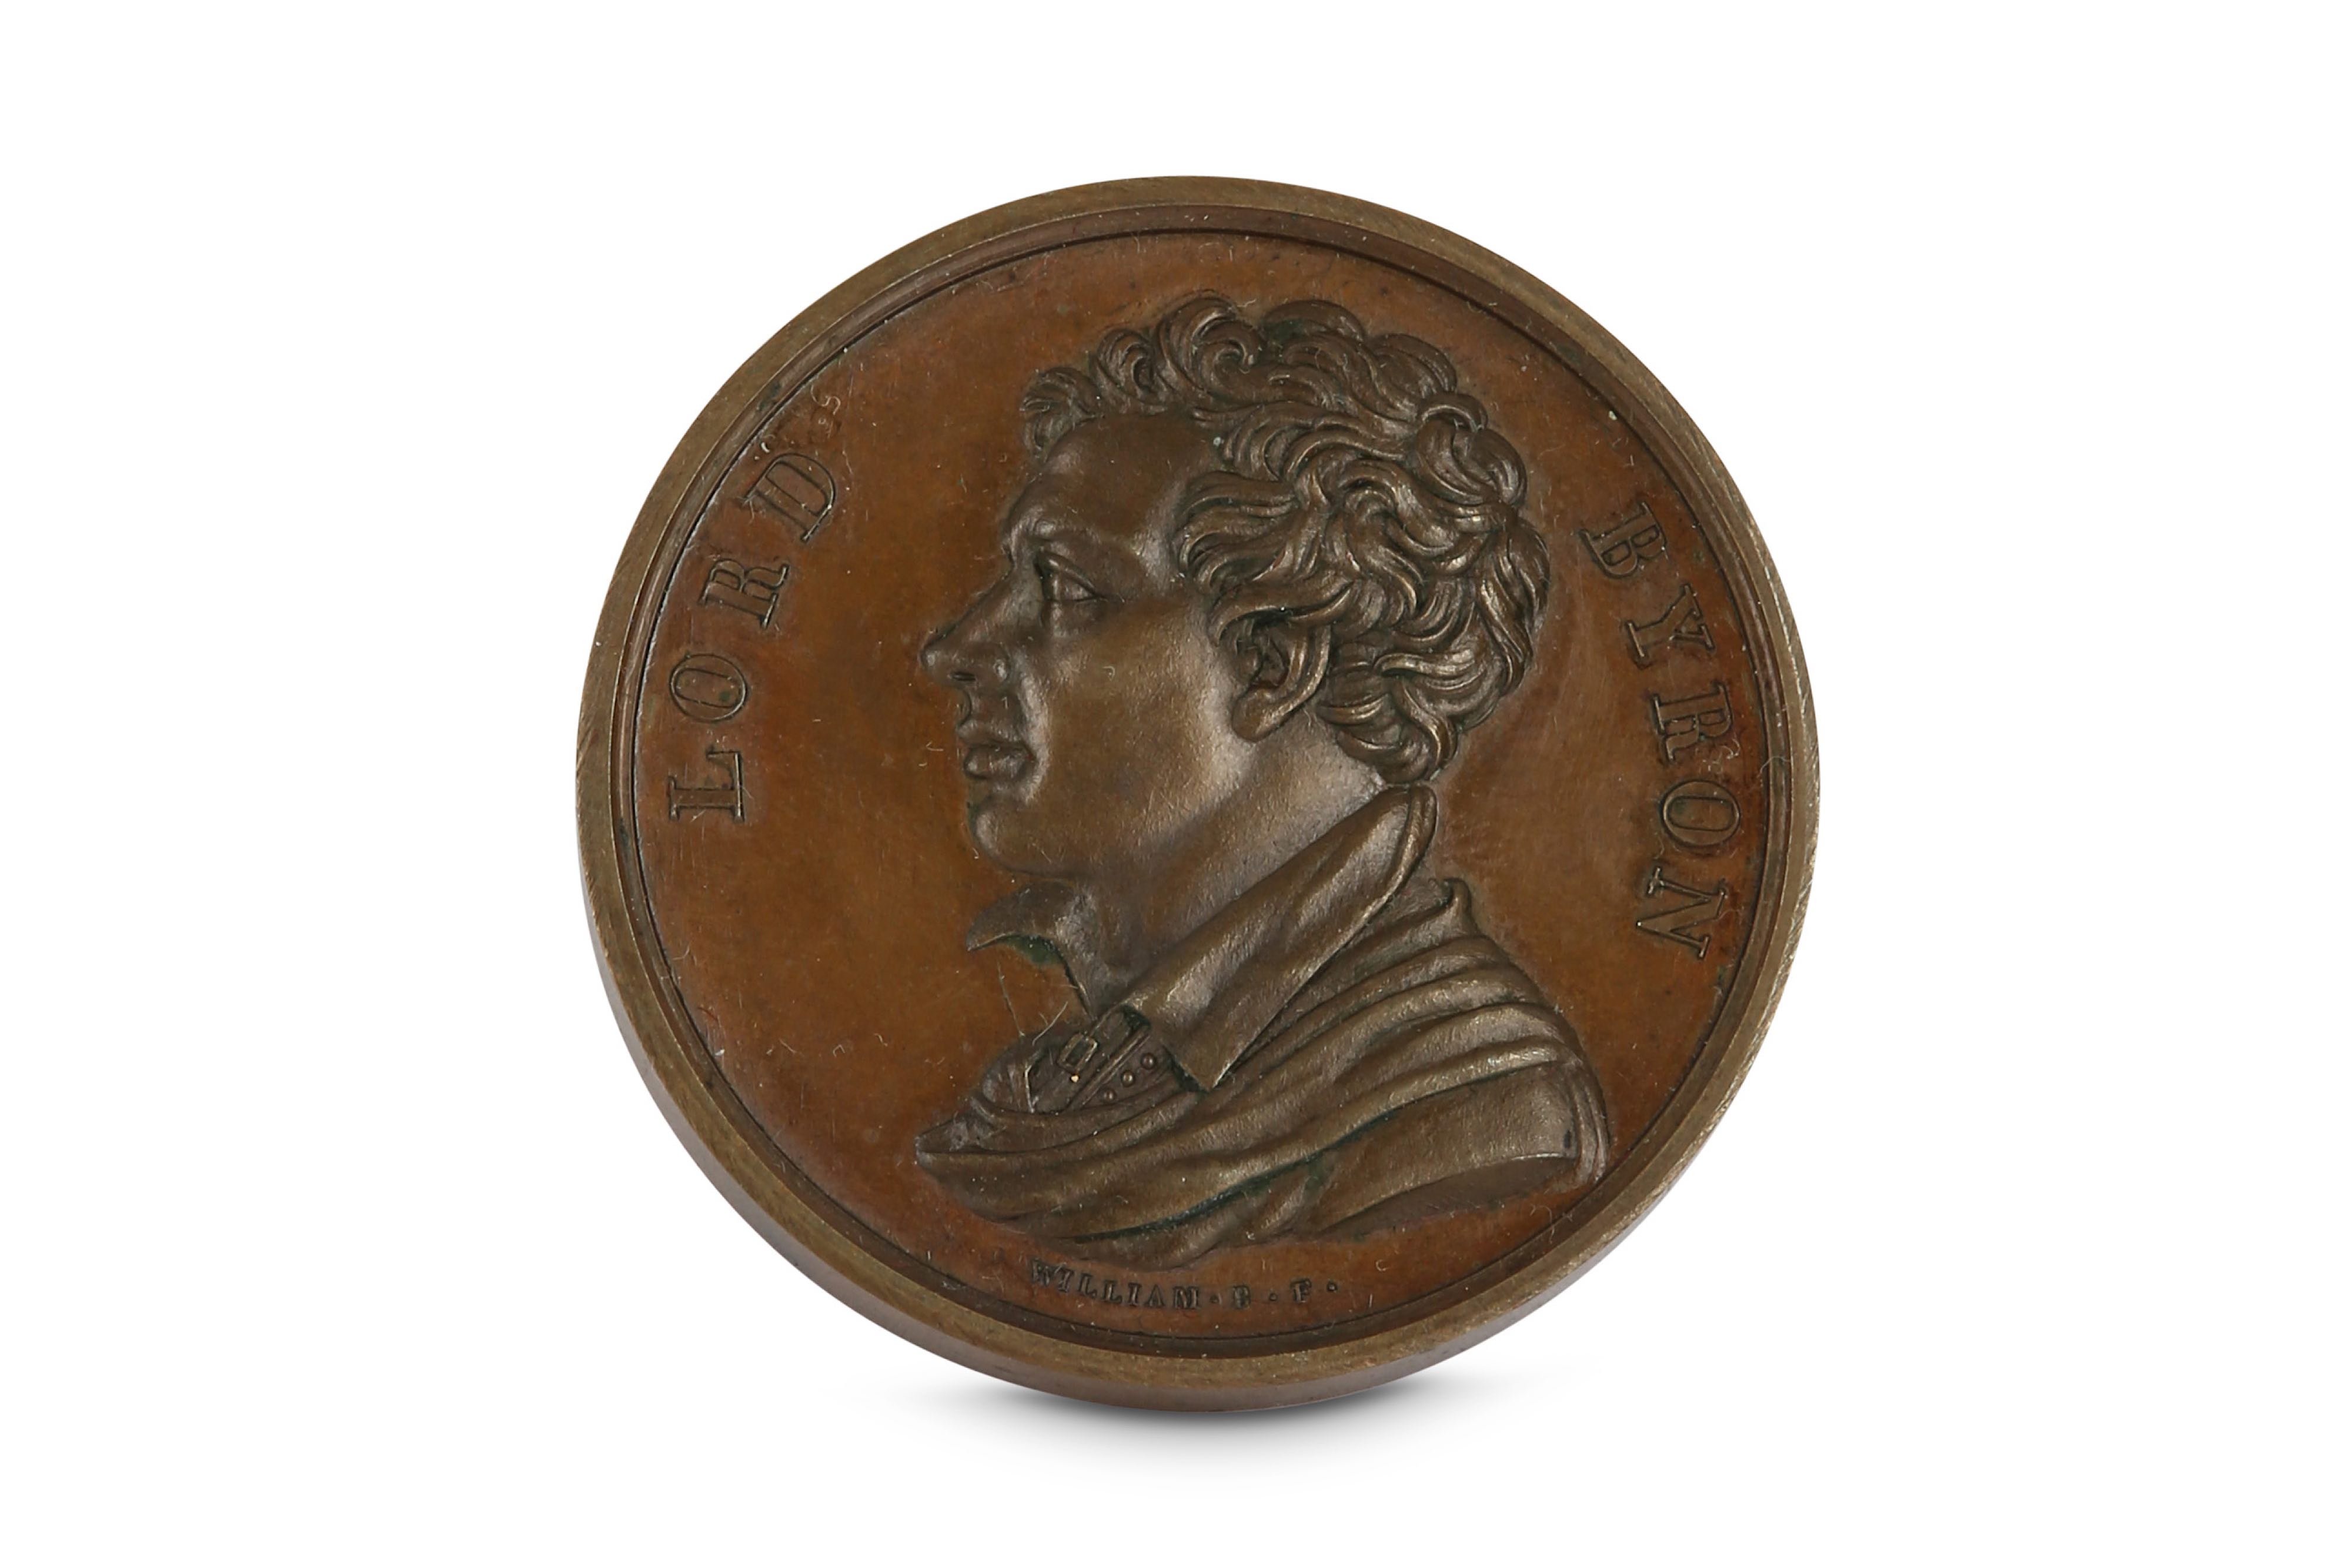 A COMMEMORATIVE BRONZE MEDALLION FOR LORD BYRON